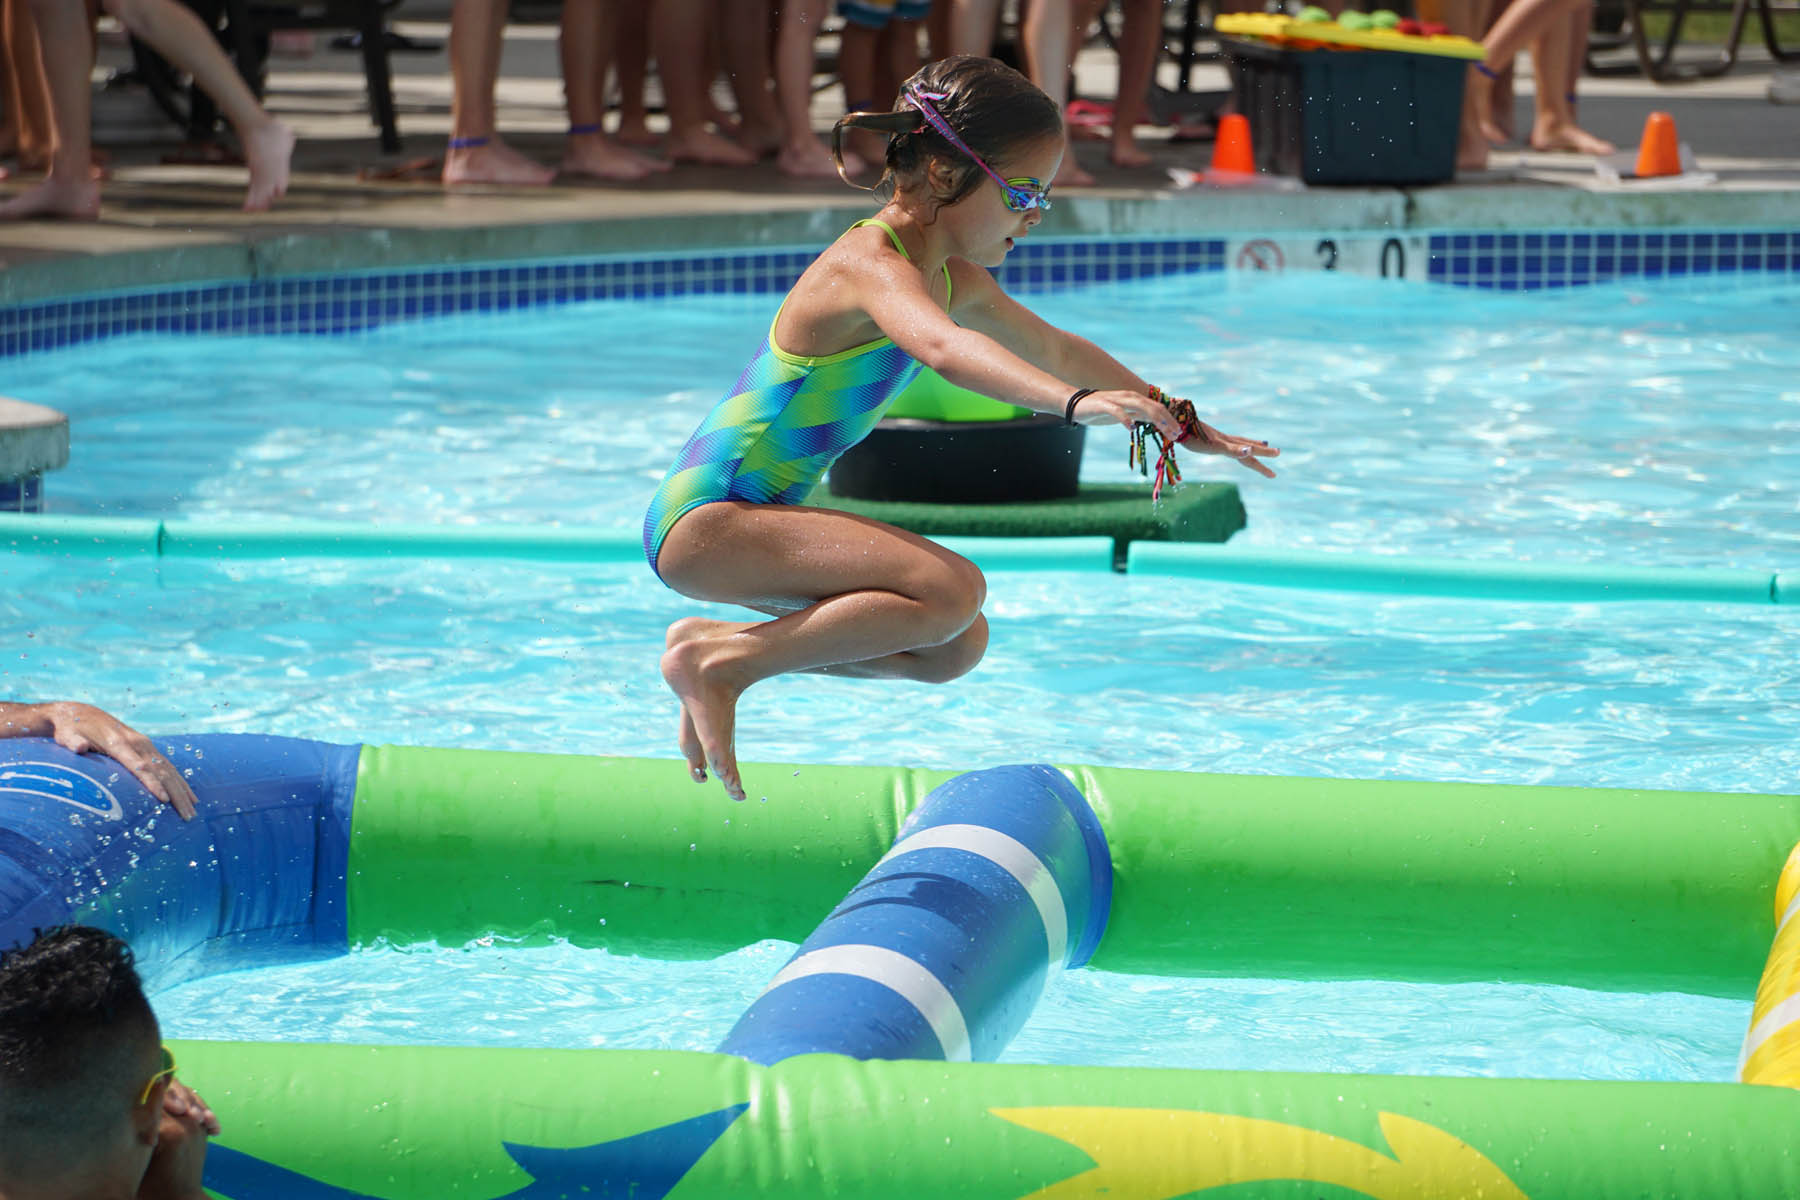 Girl jumping in the pool.